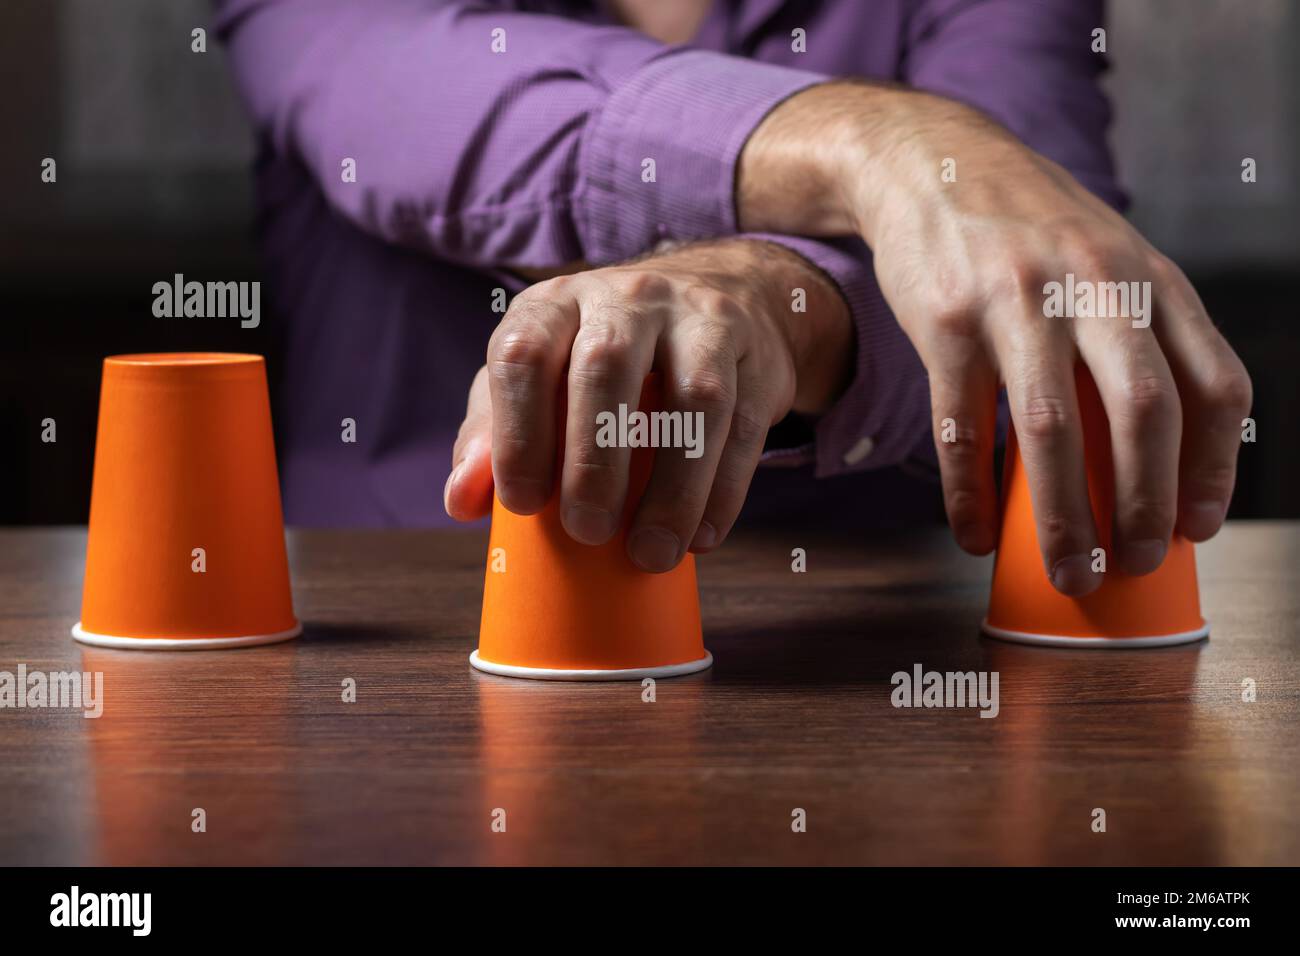 Man shows shell game of thimbles with coin, dark background. Concept deception, sleight hand Stock Photo